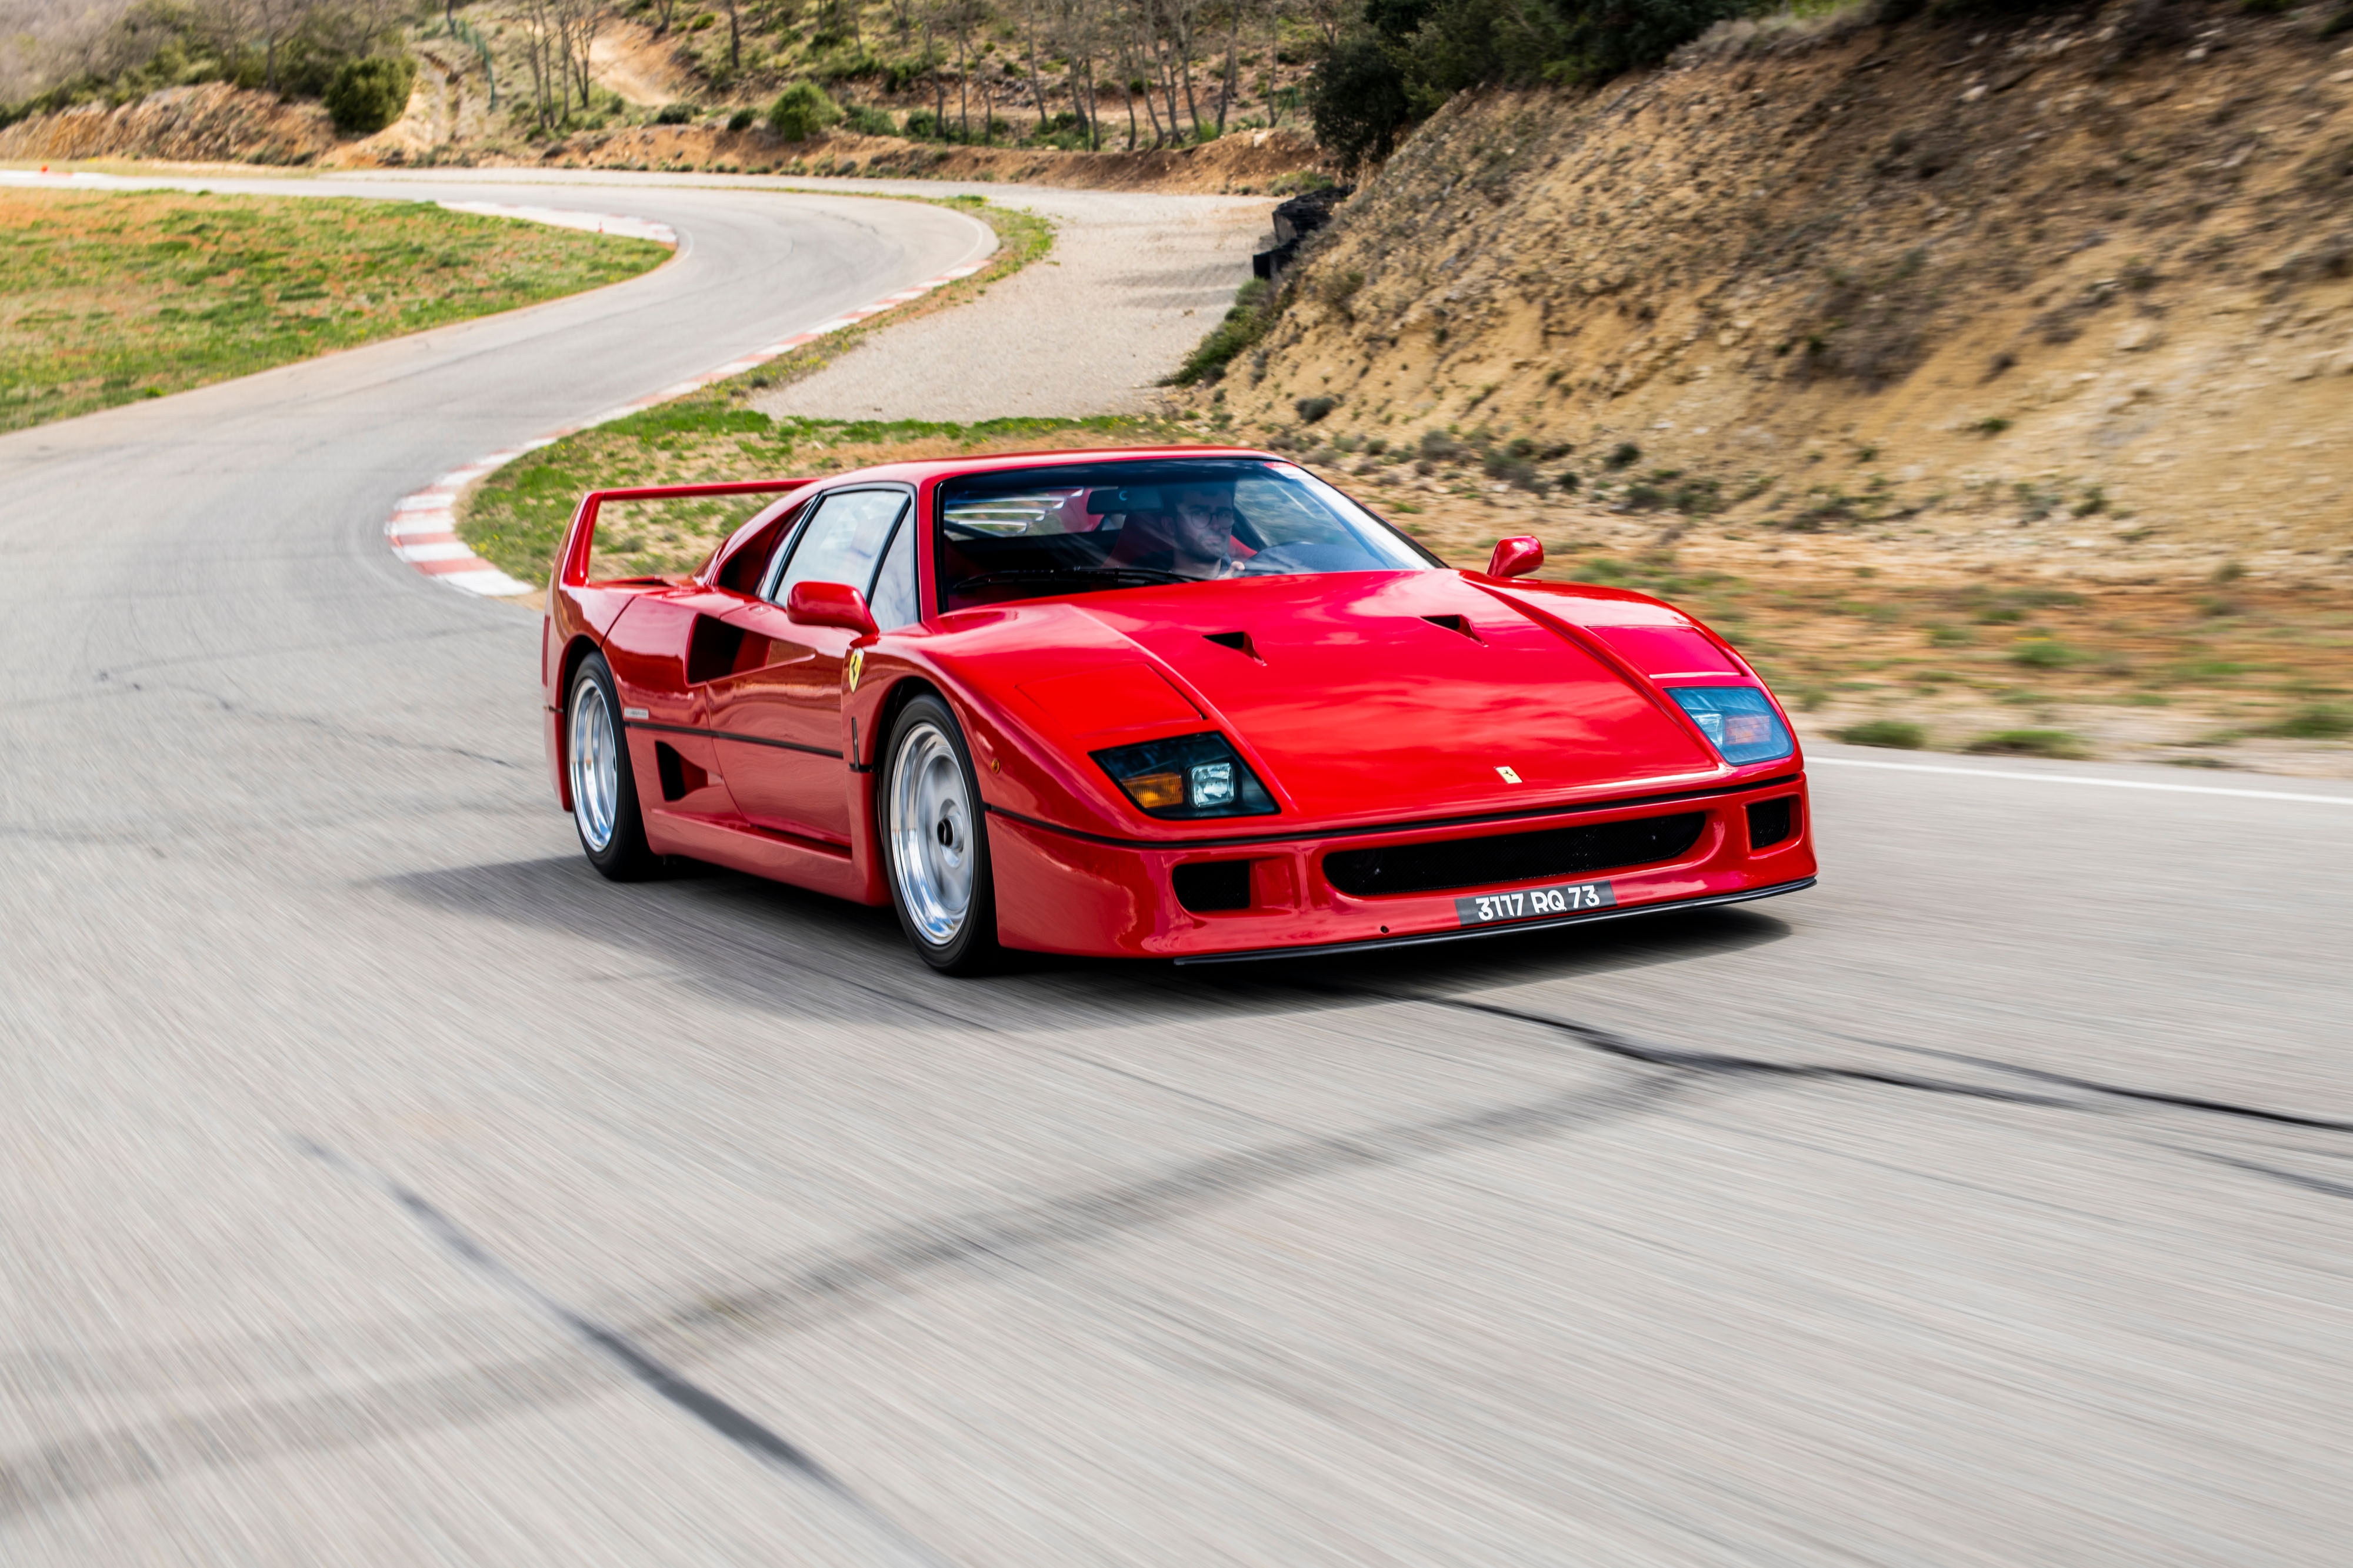 Alain Prost's Ferrari F40 going under the hammer at RM Sotheby's